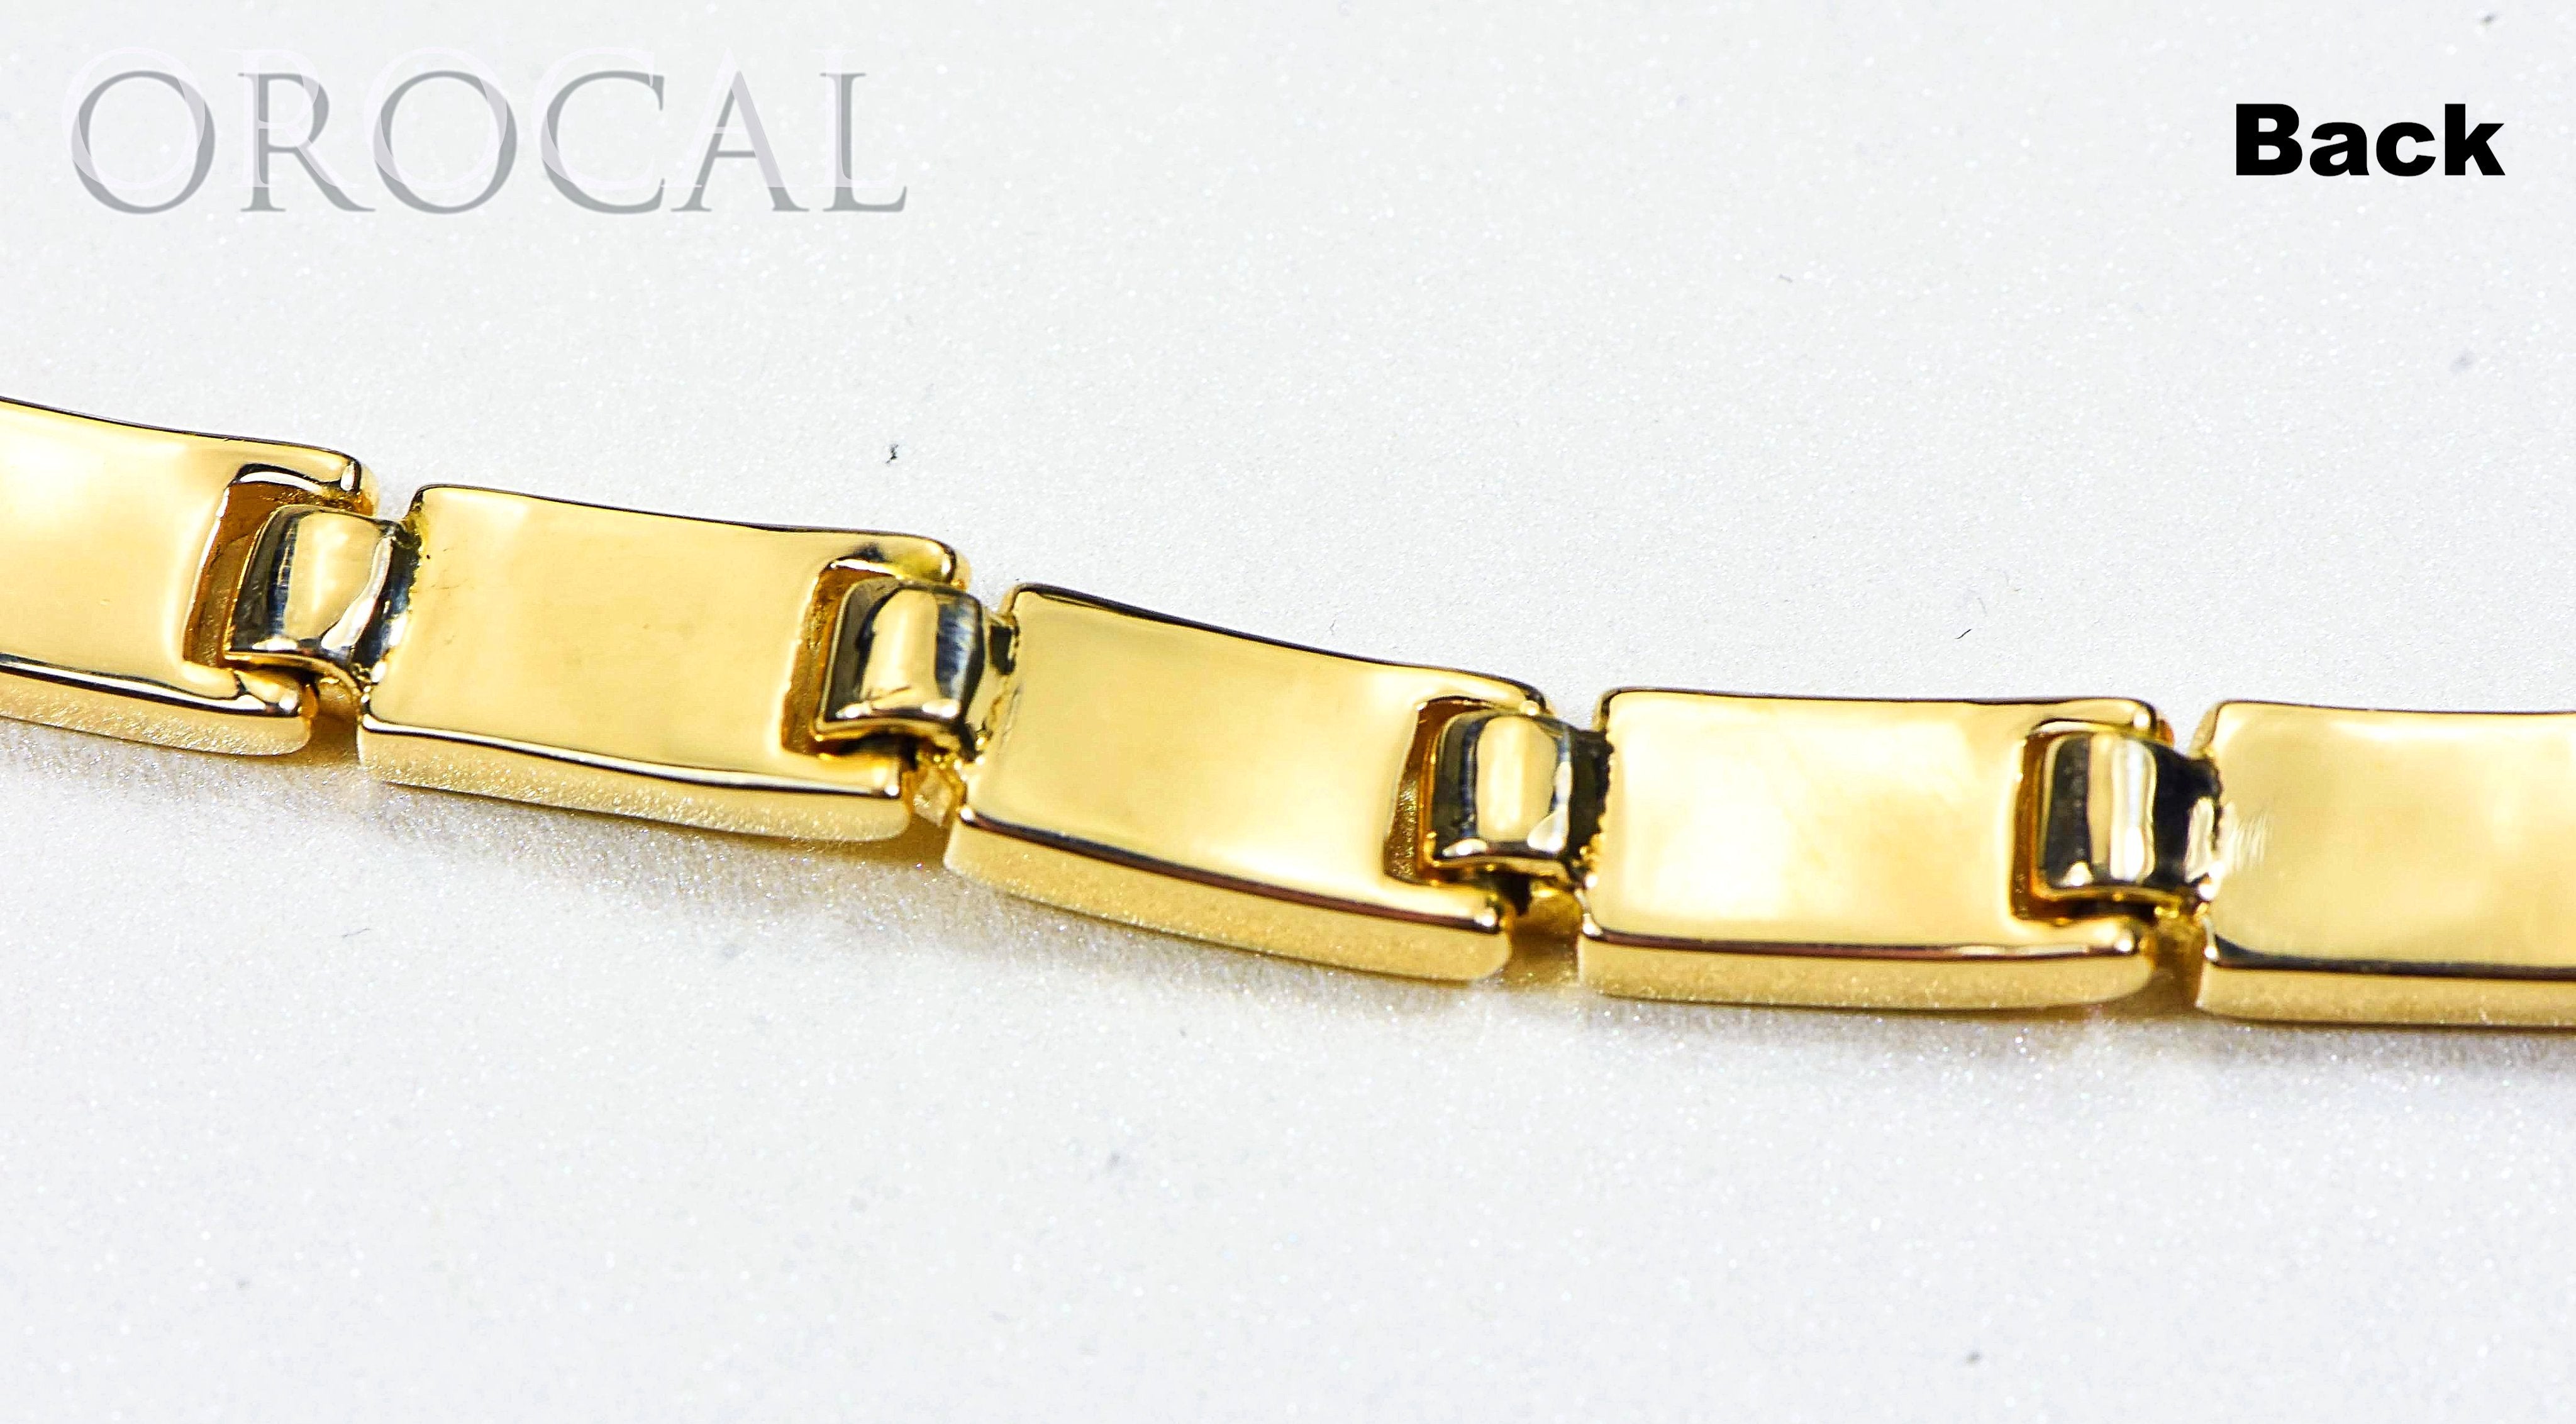 Gold Nugget Bracelet "Orocal" B6MM14L Genuine Hand Crafted Jewelry - 14K Gold Casting